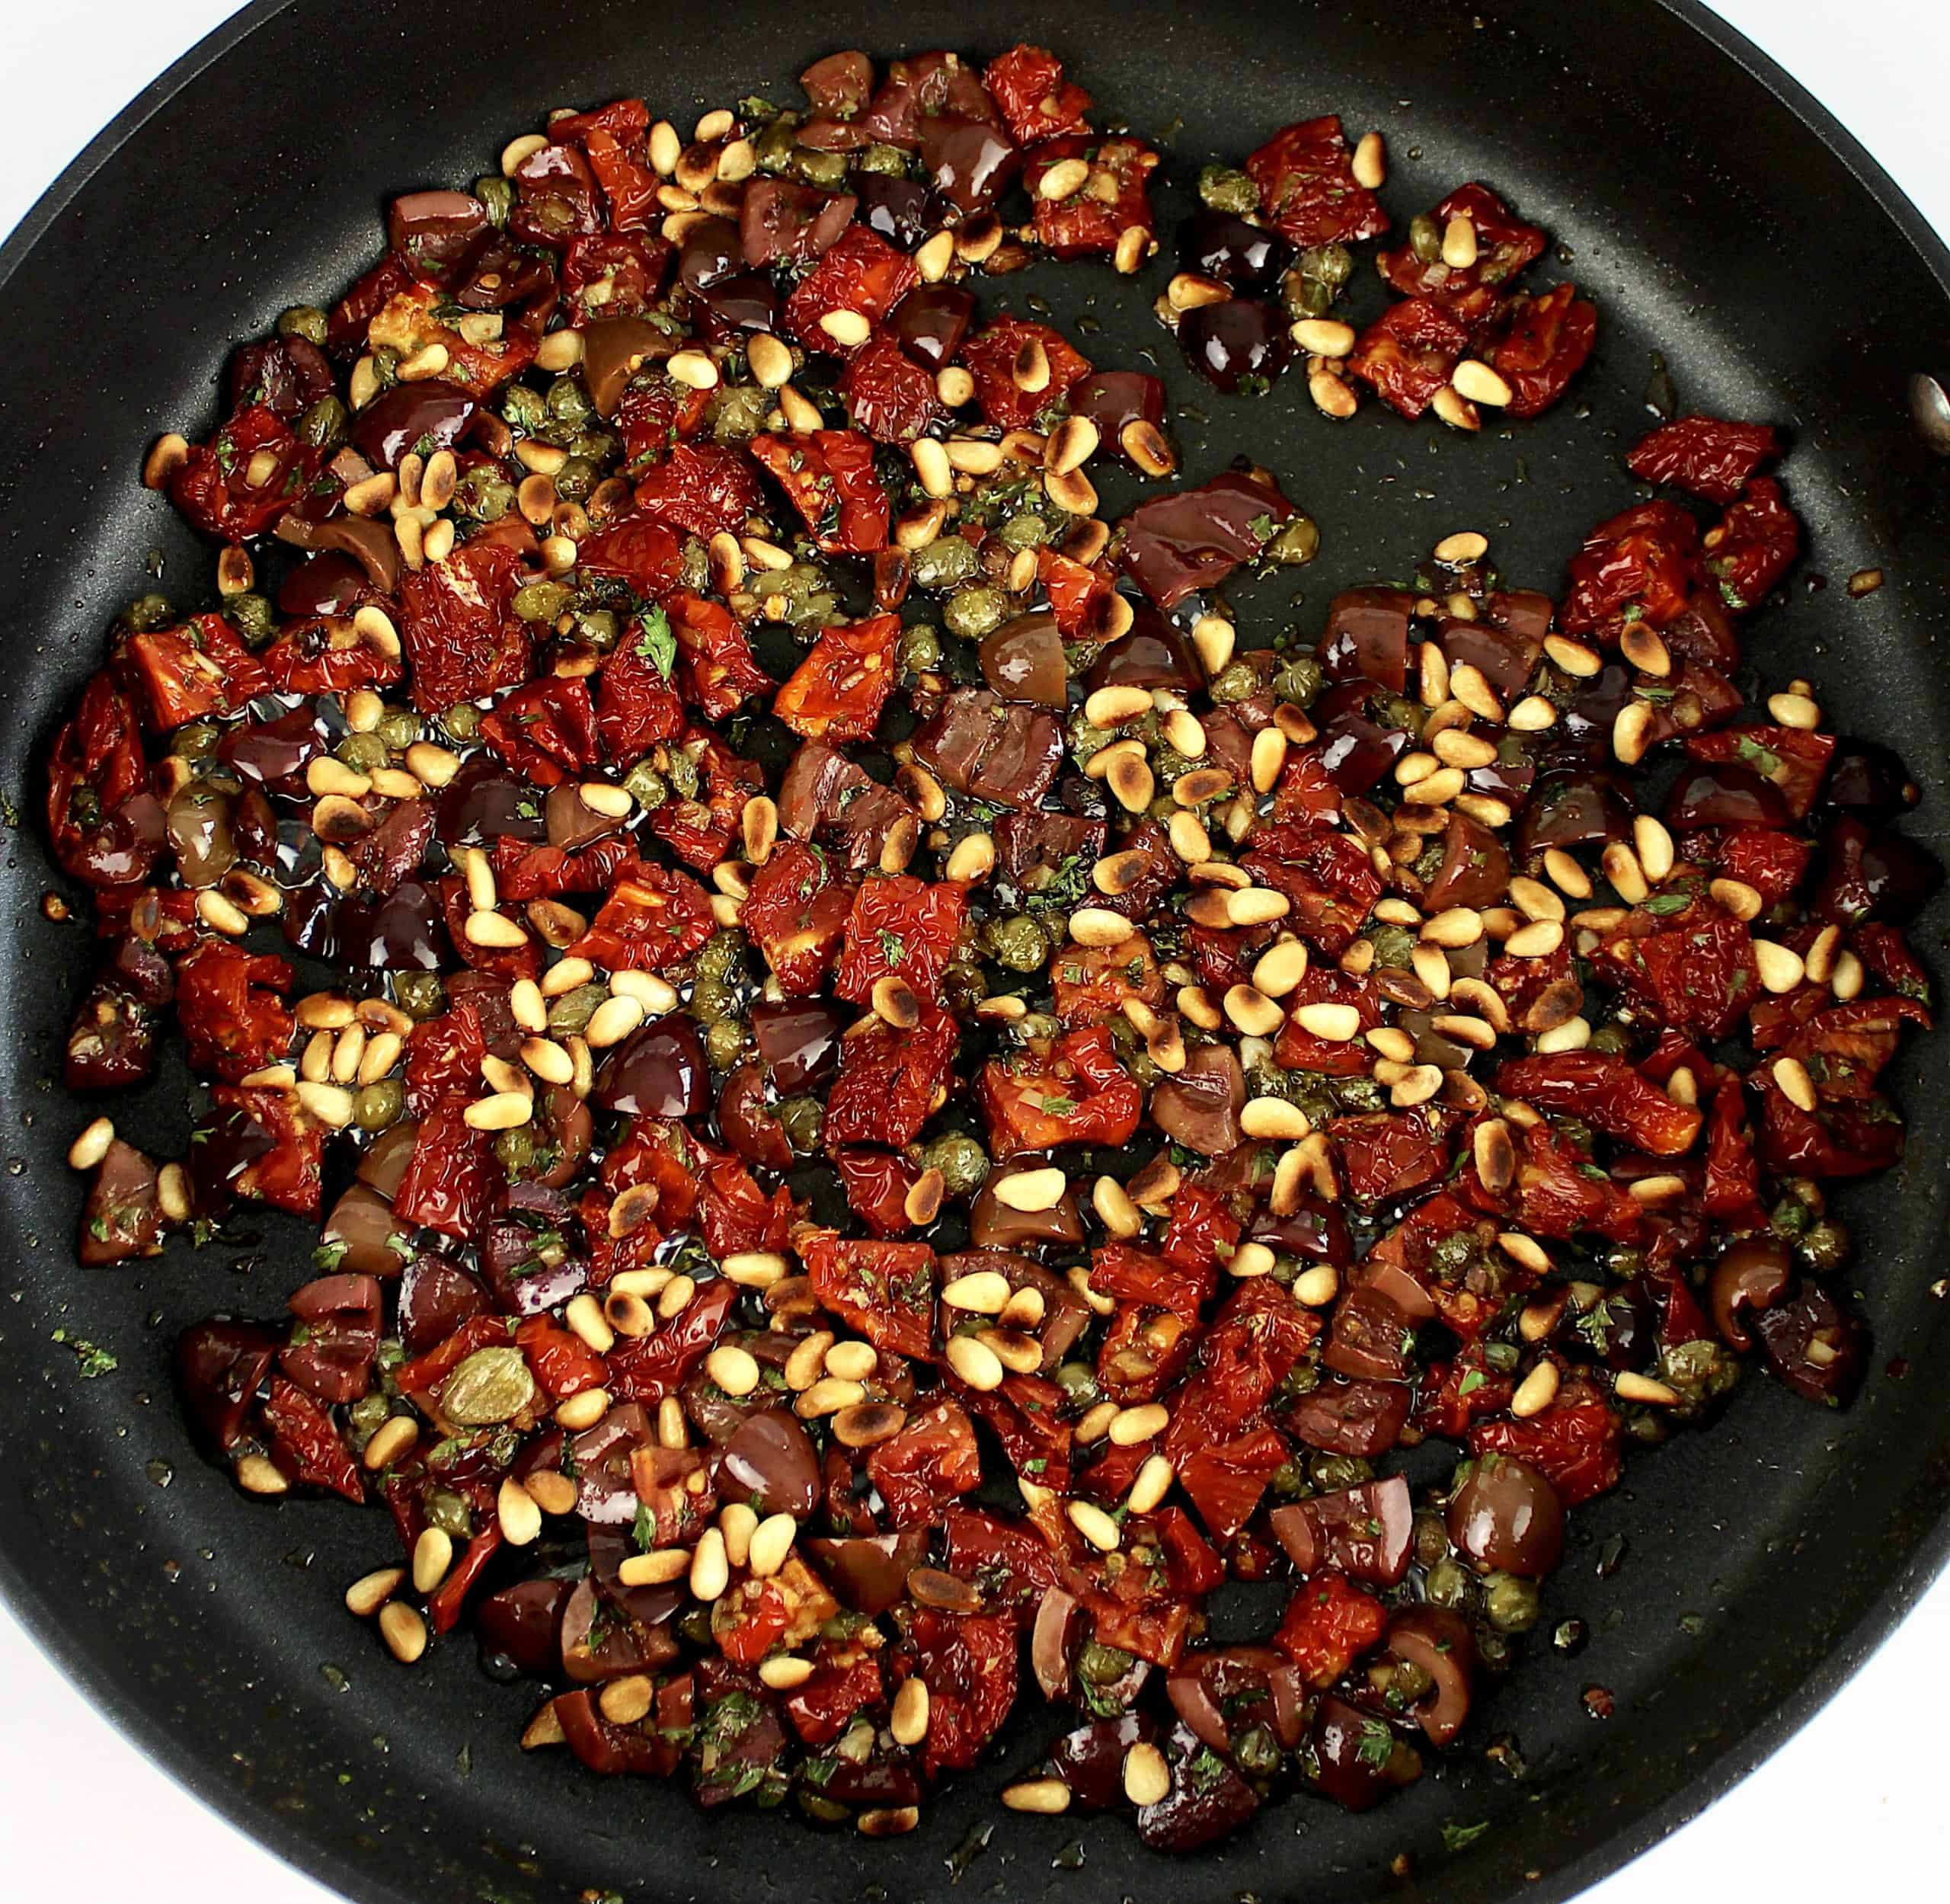 chopped olives sun-dried tomatoes pine nuts and capers in skillet